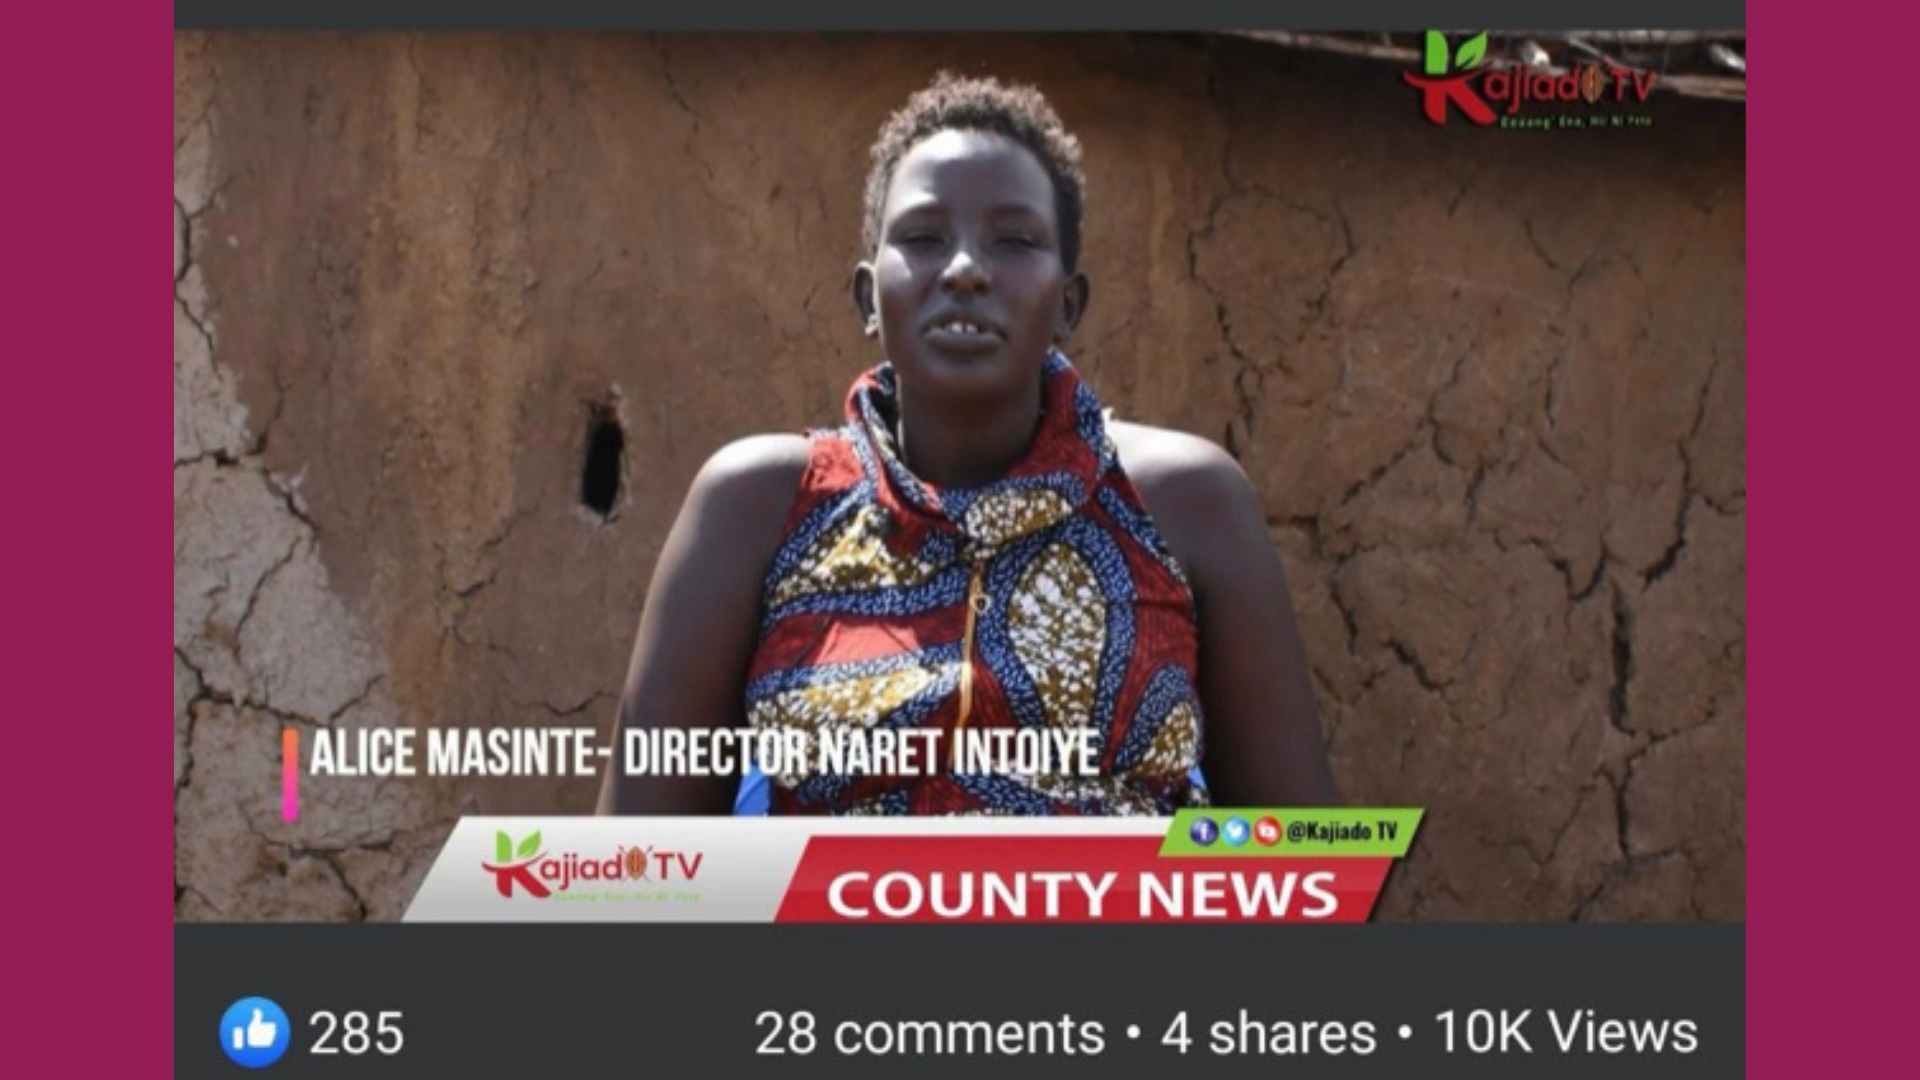 You are currently viewing Kajiado TV broadcast chief, campaigner, and ex-cutter on how to end FGM in Kajiado County, Kenya 